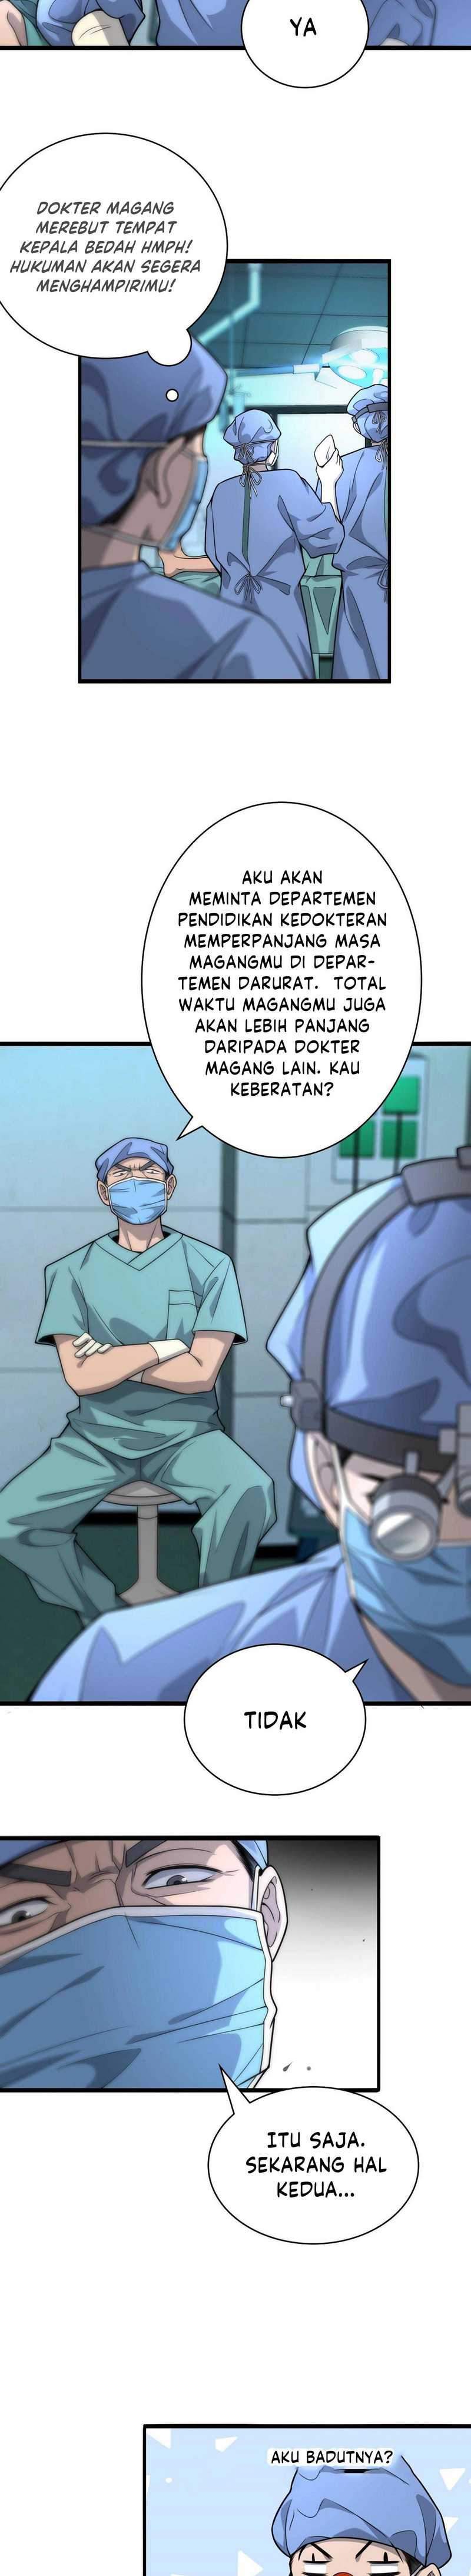 Great Doctor Ling Ran Chapter 23